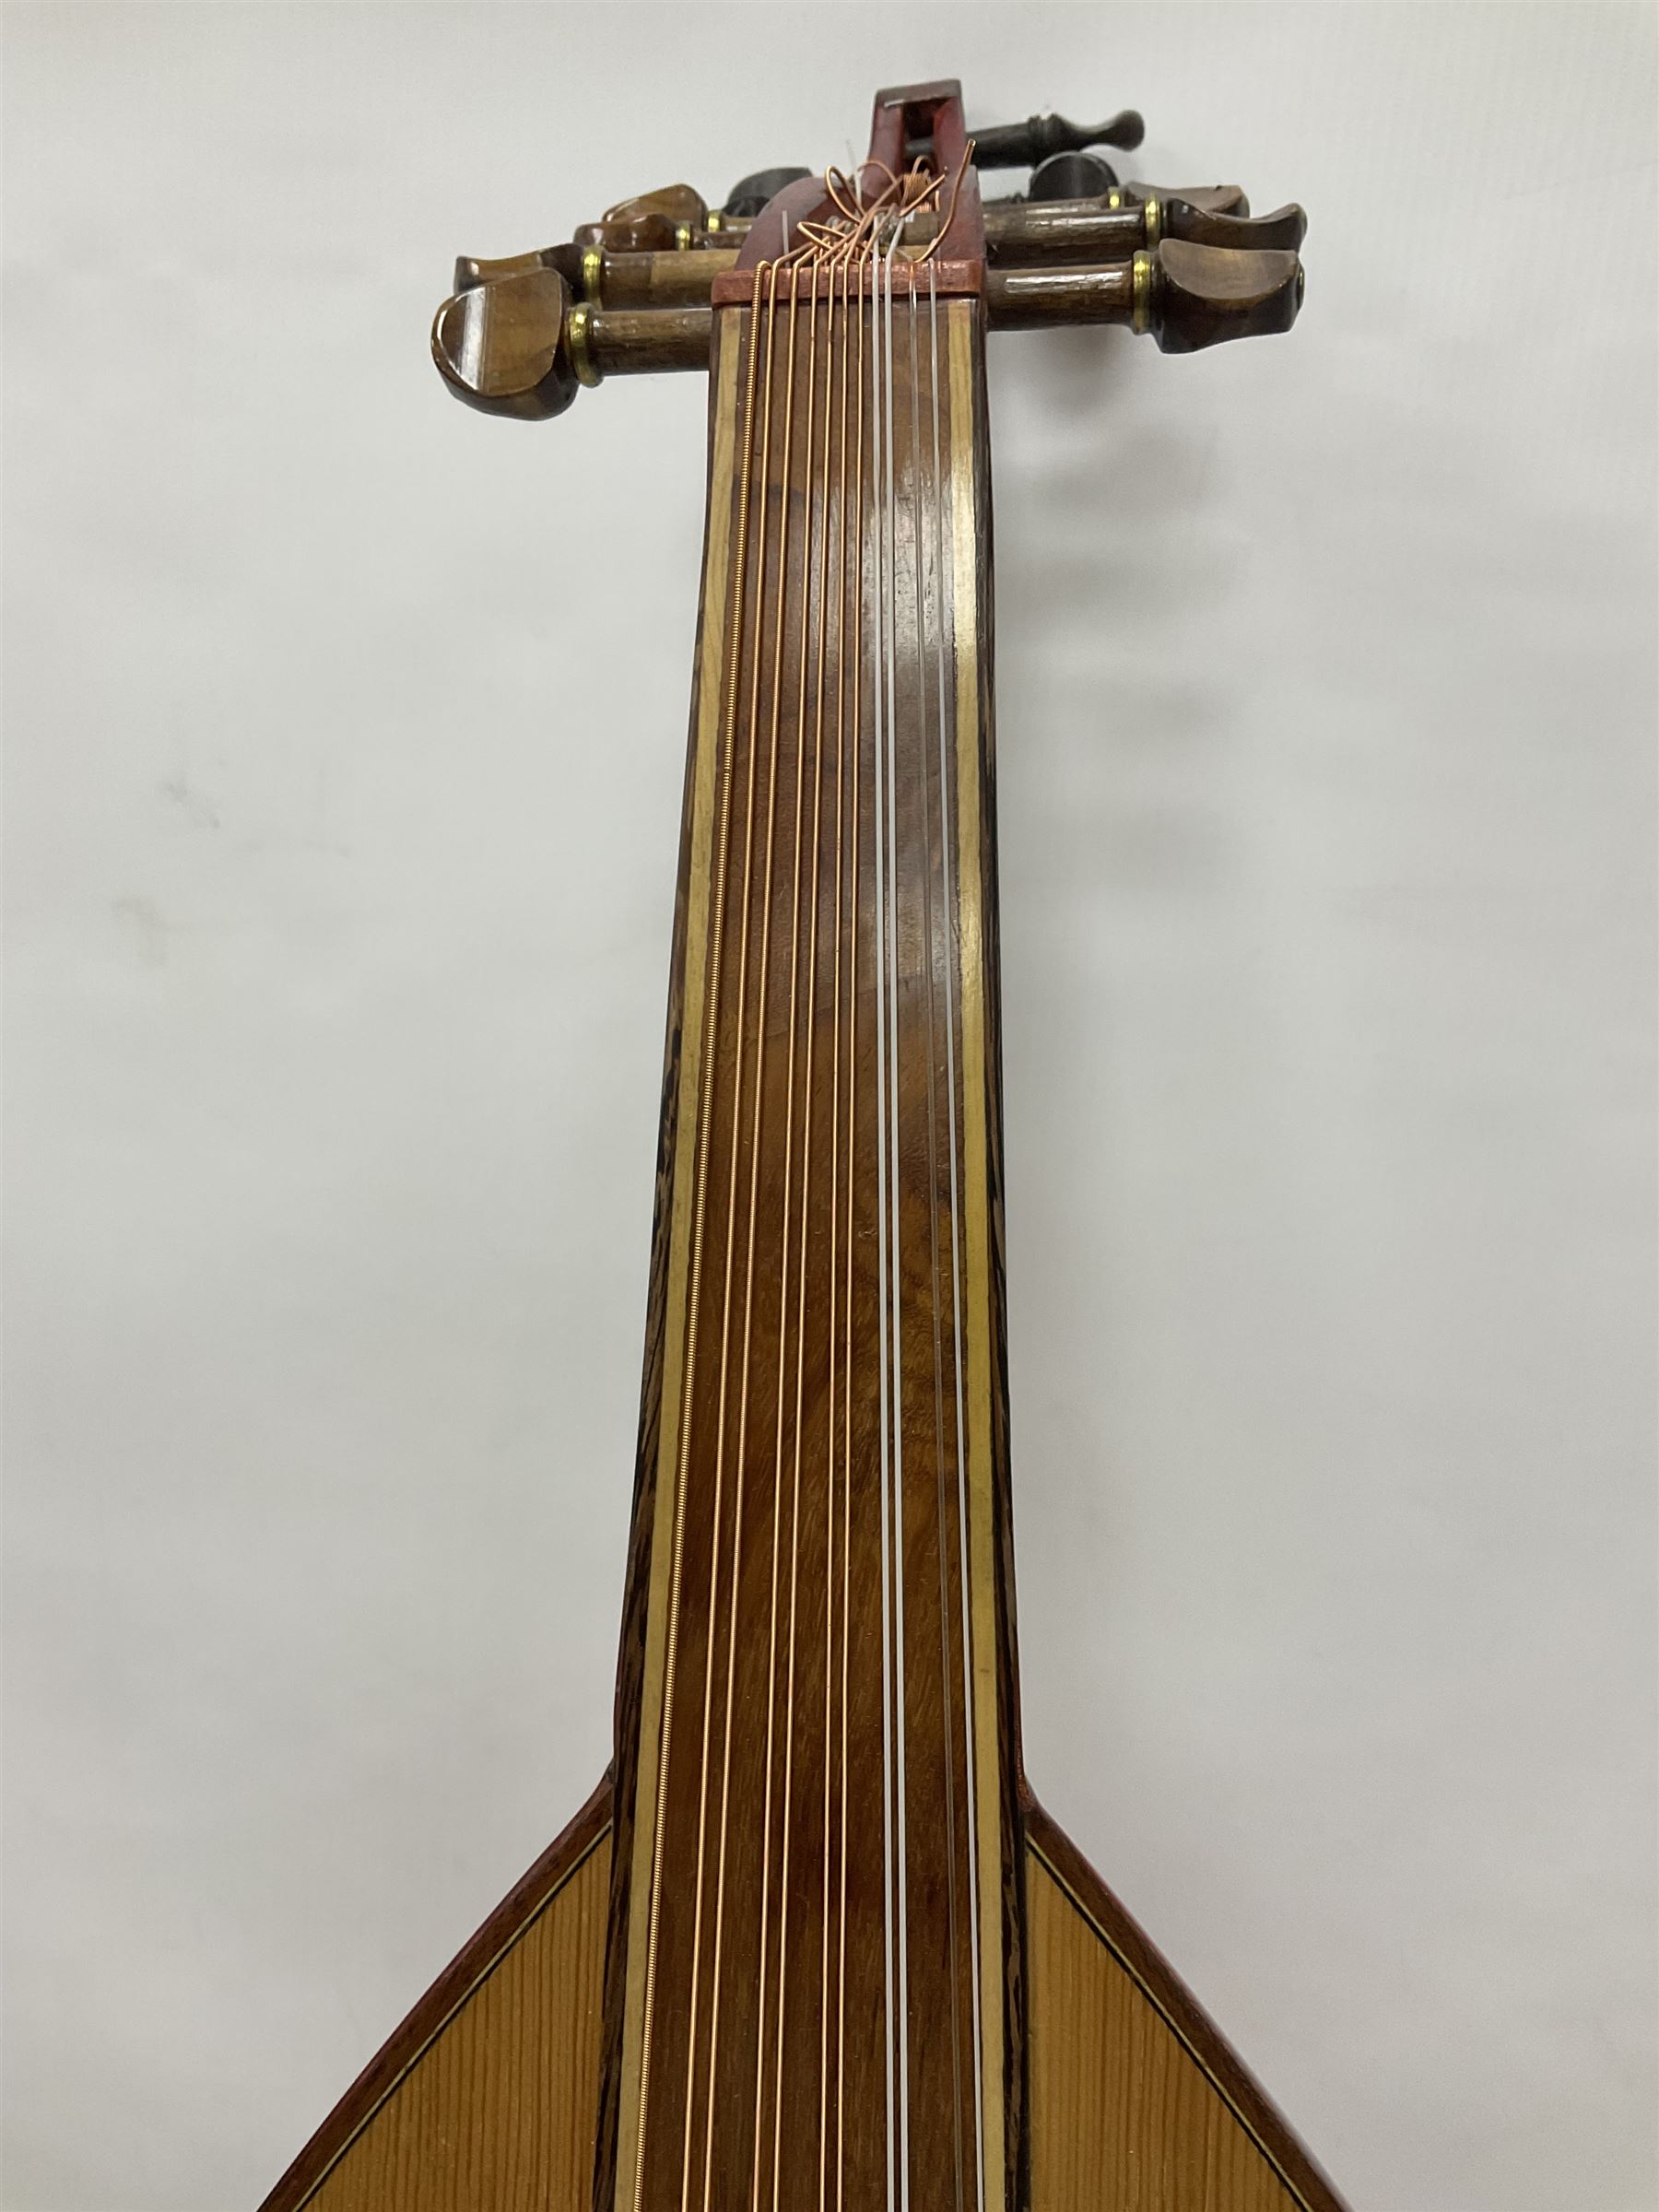 20th century Middle Eastern six string lute with a segmented back and a purpose designed hardwood st - Image 8 of 16